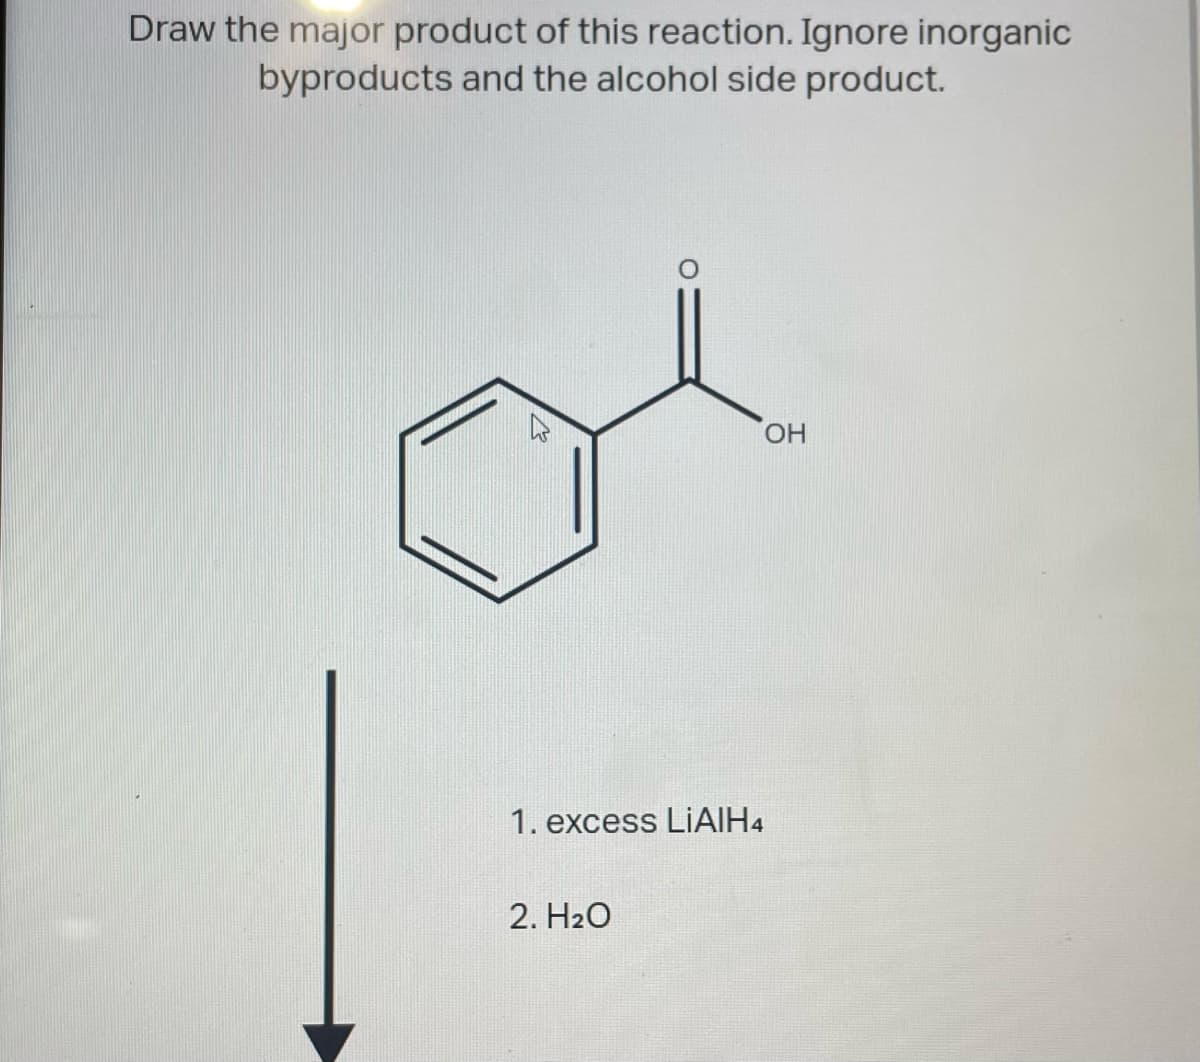 Draw the major product of this reaction. Ignore inorganic
byproducts and the alcohol side product.
OH
1. excess LIAIH4
2. H₂O